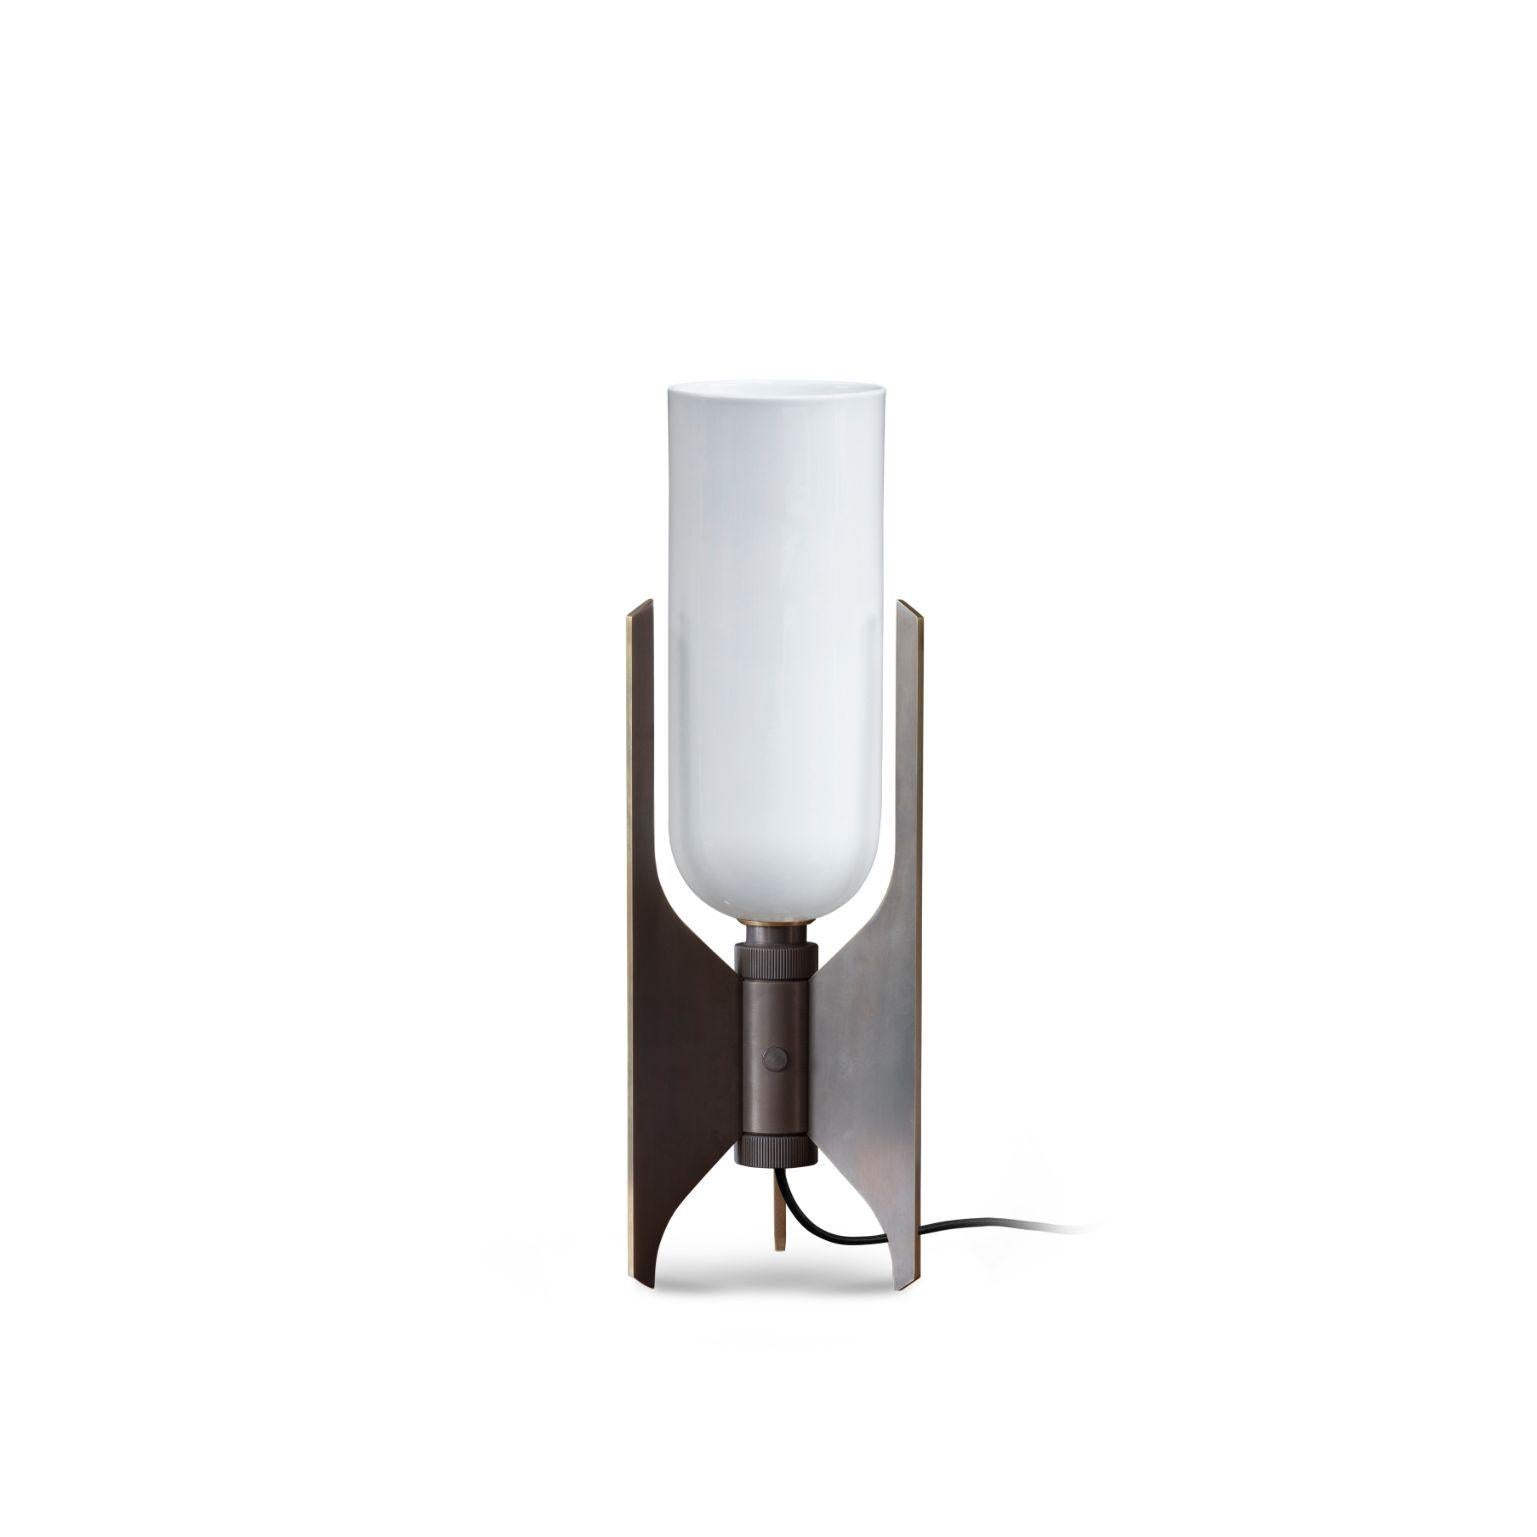 Pennon table lamp - Bronze by Bert Frank
Dimensions: 42 x 13.9 x 15.7 cm
Materials: Bronze, Bone China

When Adam Yeats and Robbie Llewellyn founded Bert Frank in 2013 it was a meeting of minds and the start of a collaborative creative